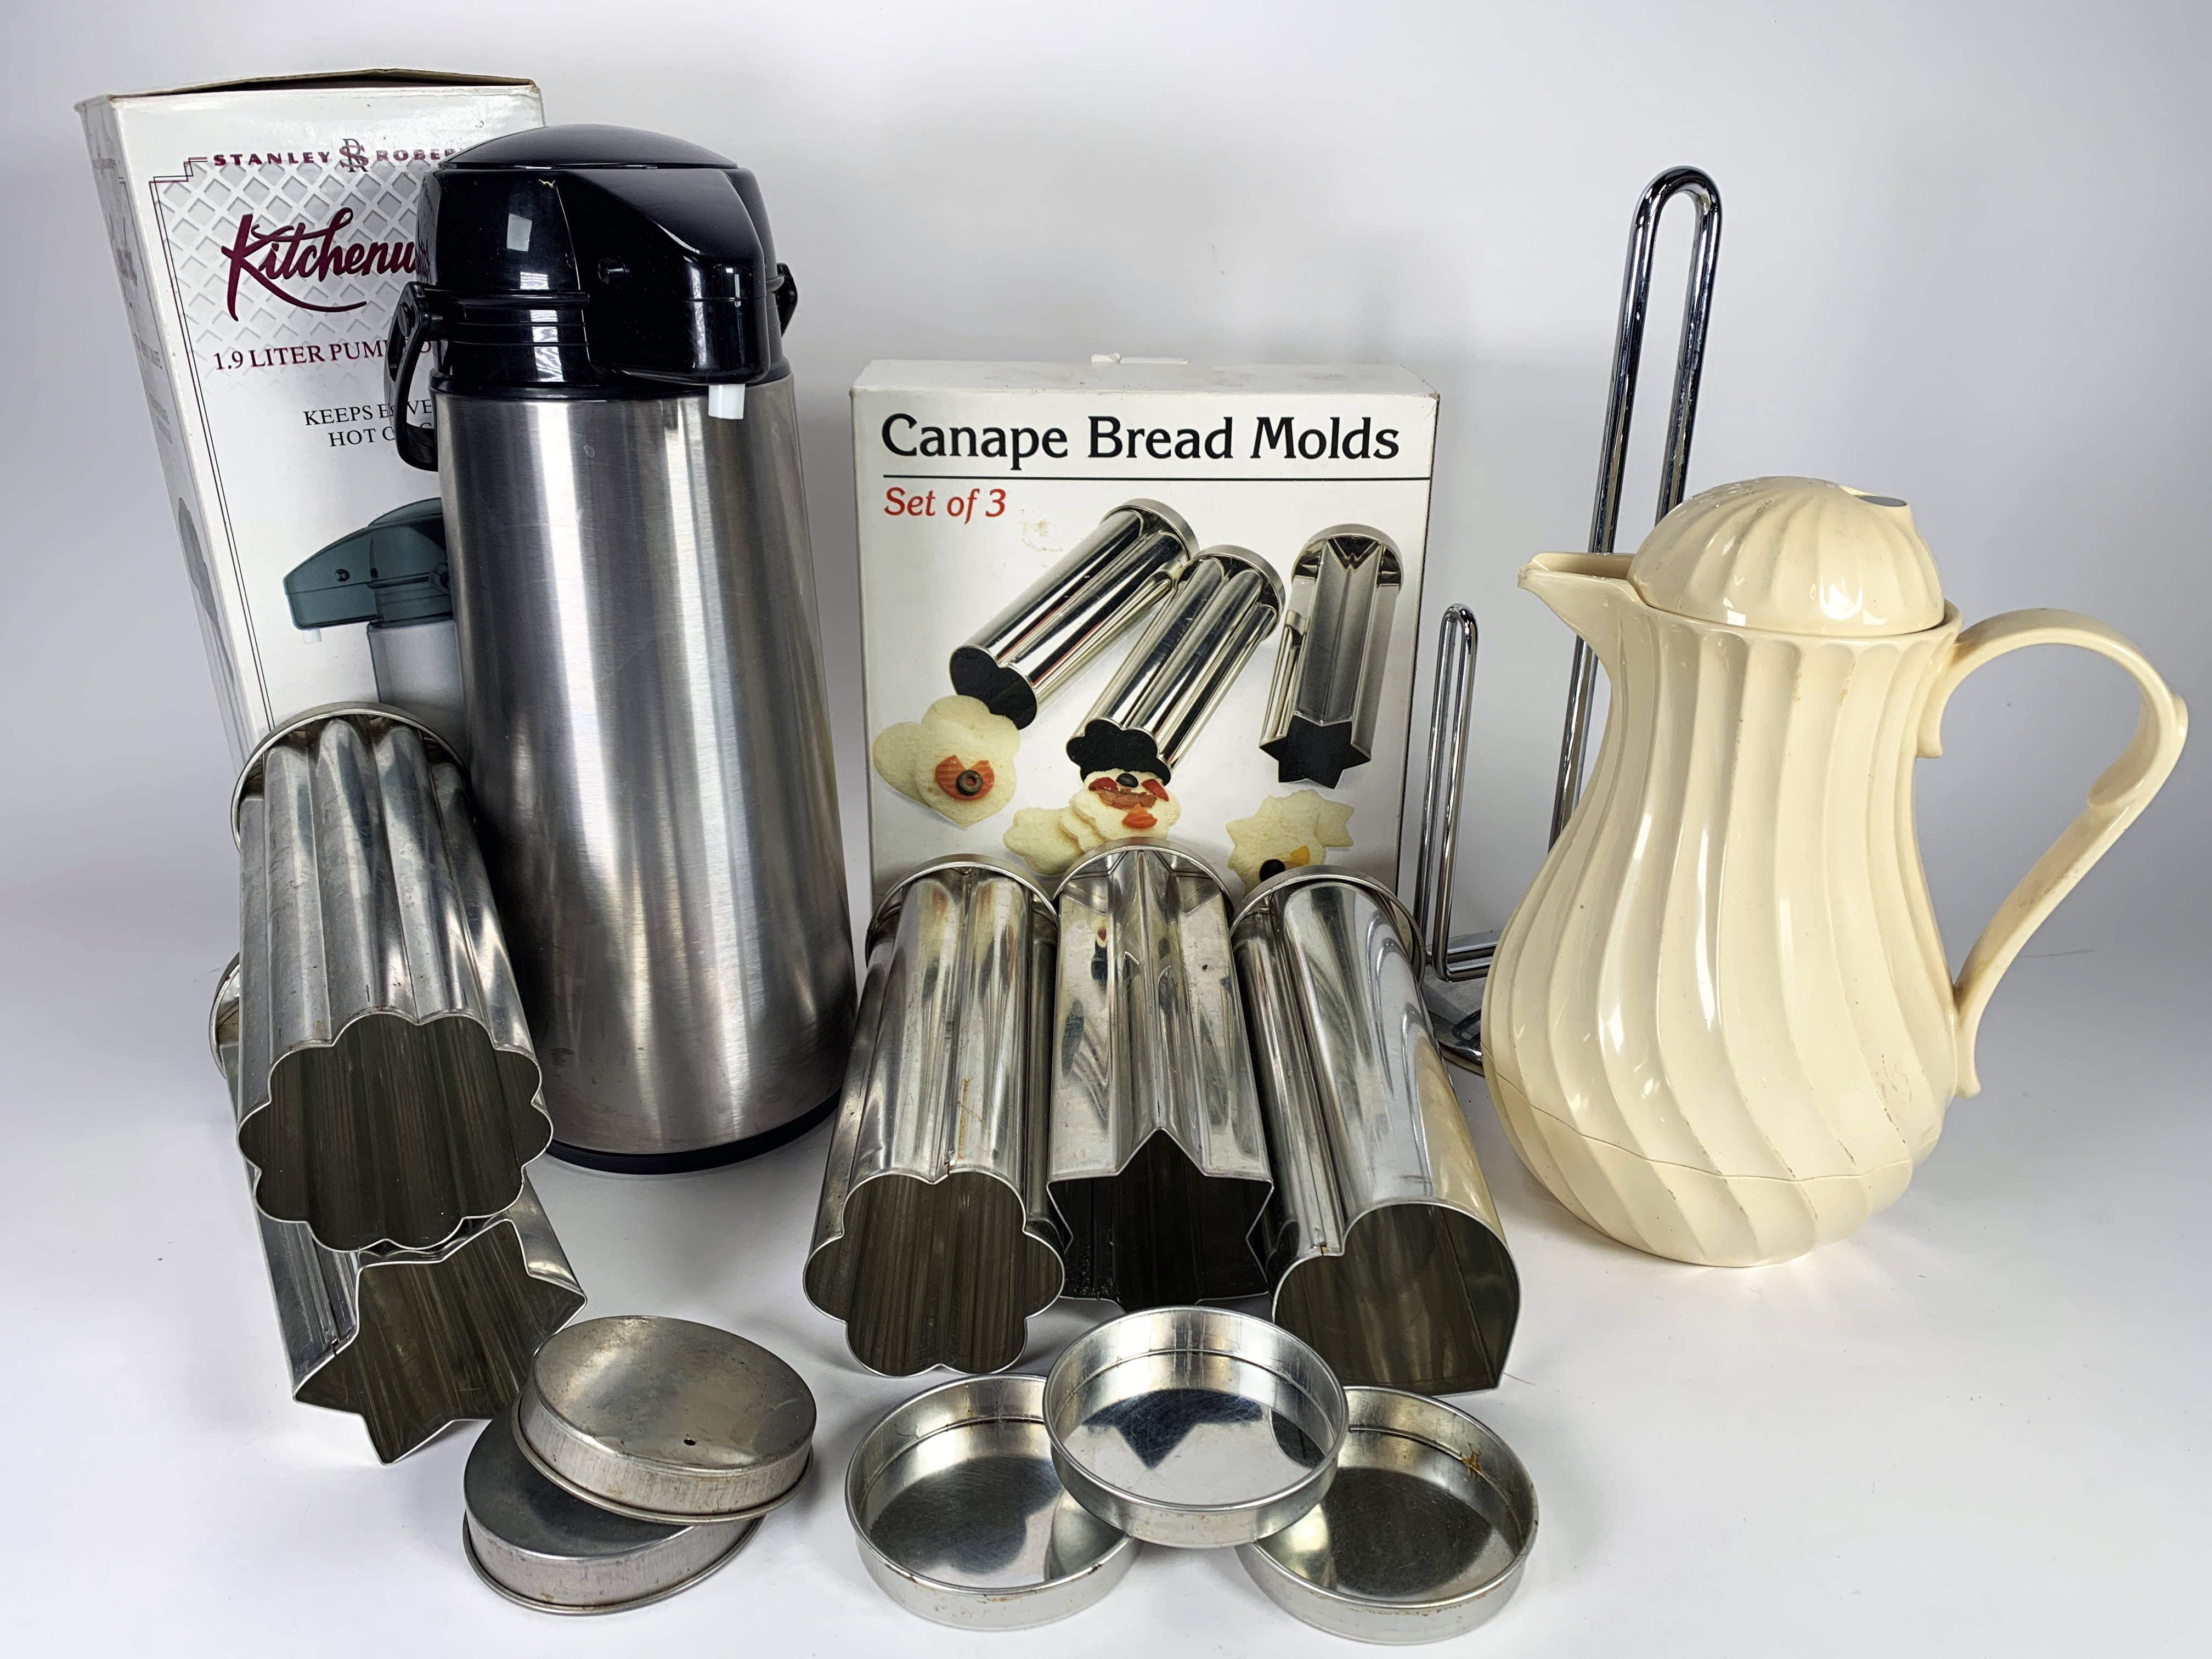 Pump Carafe, Canape Bread Molds  image 1